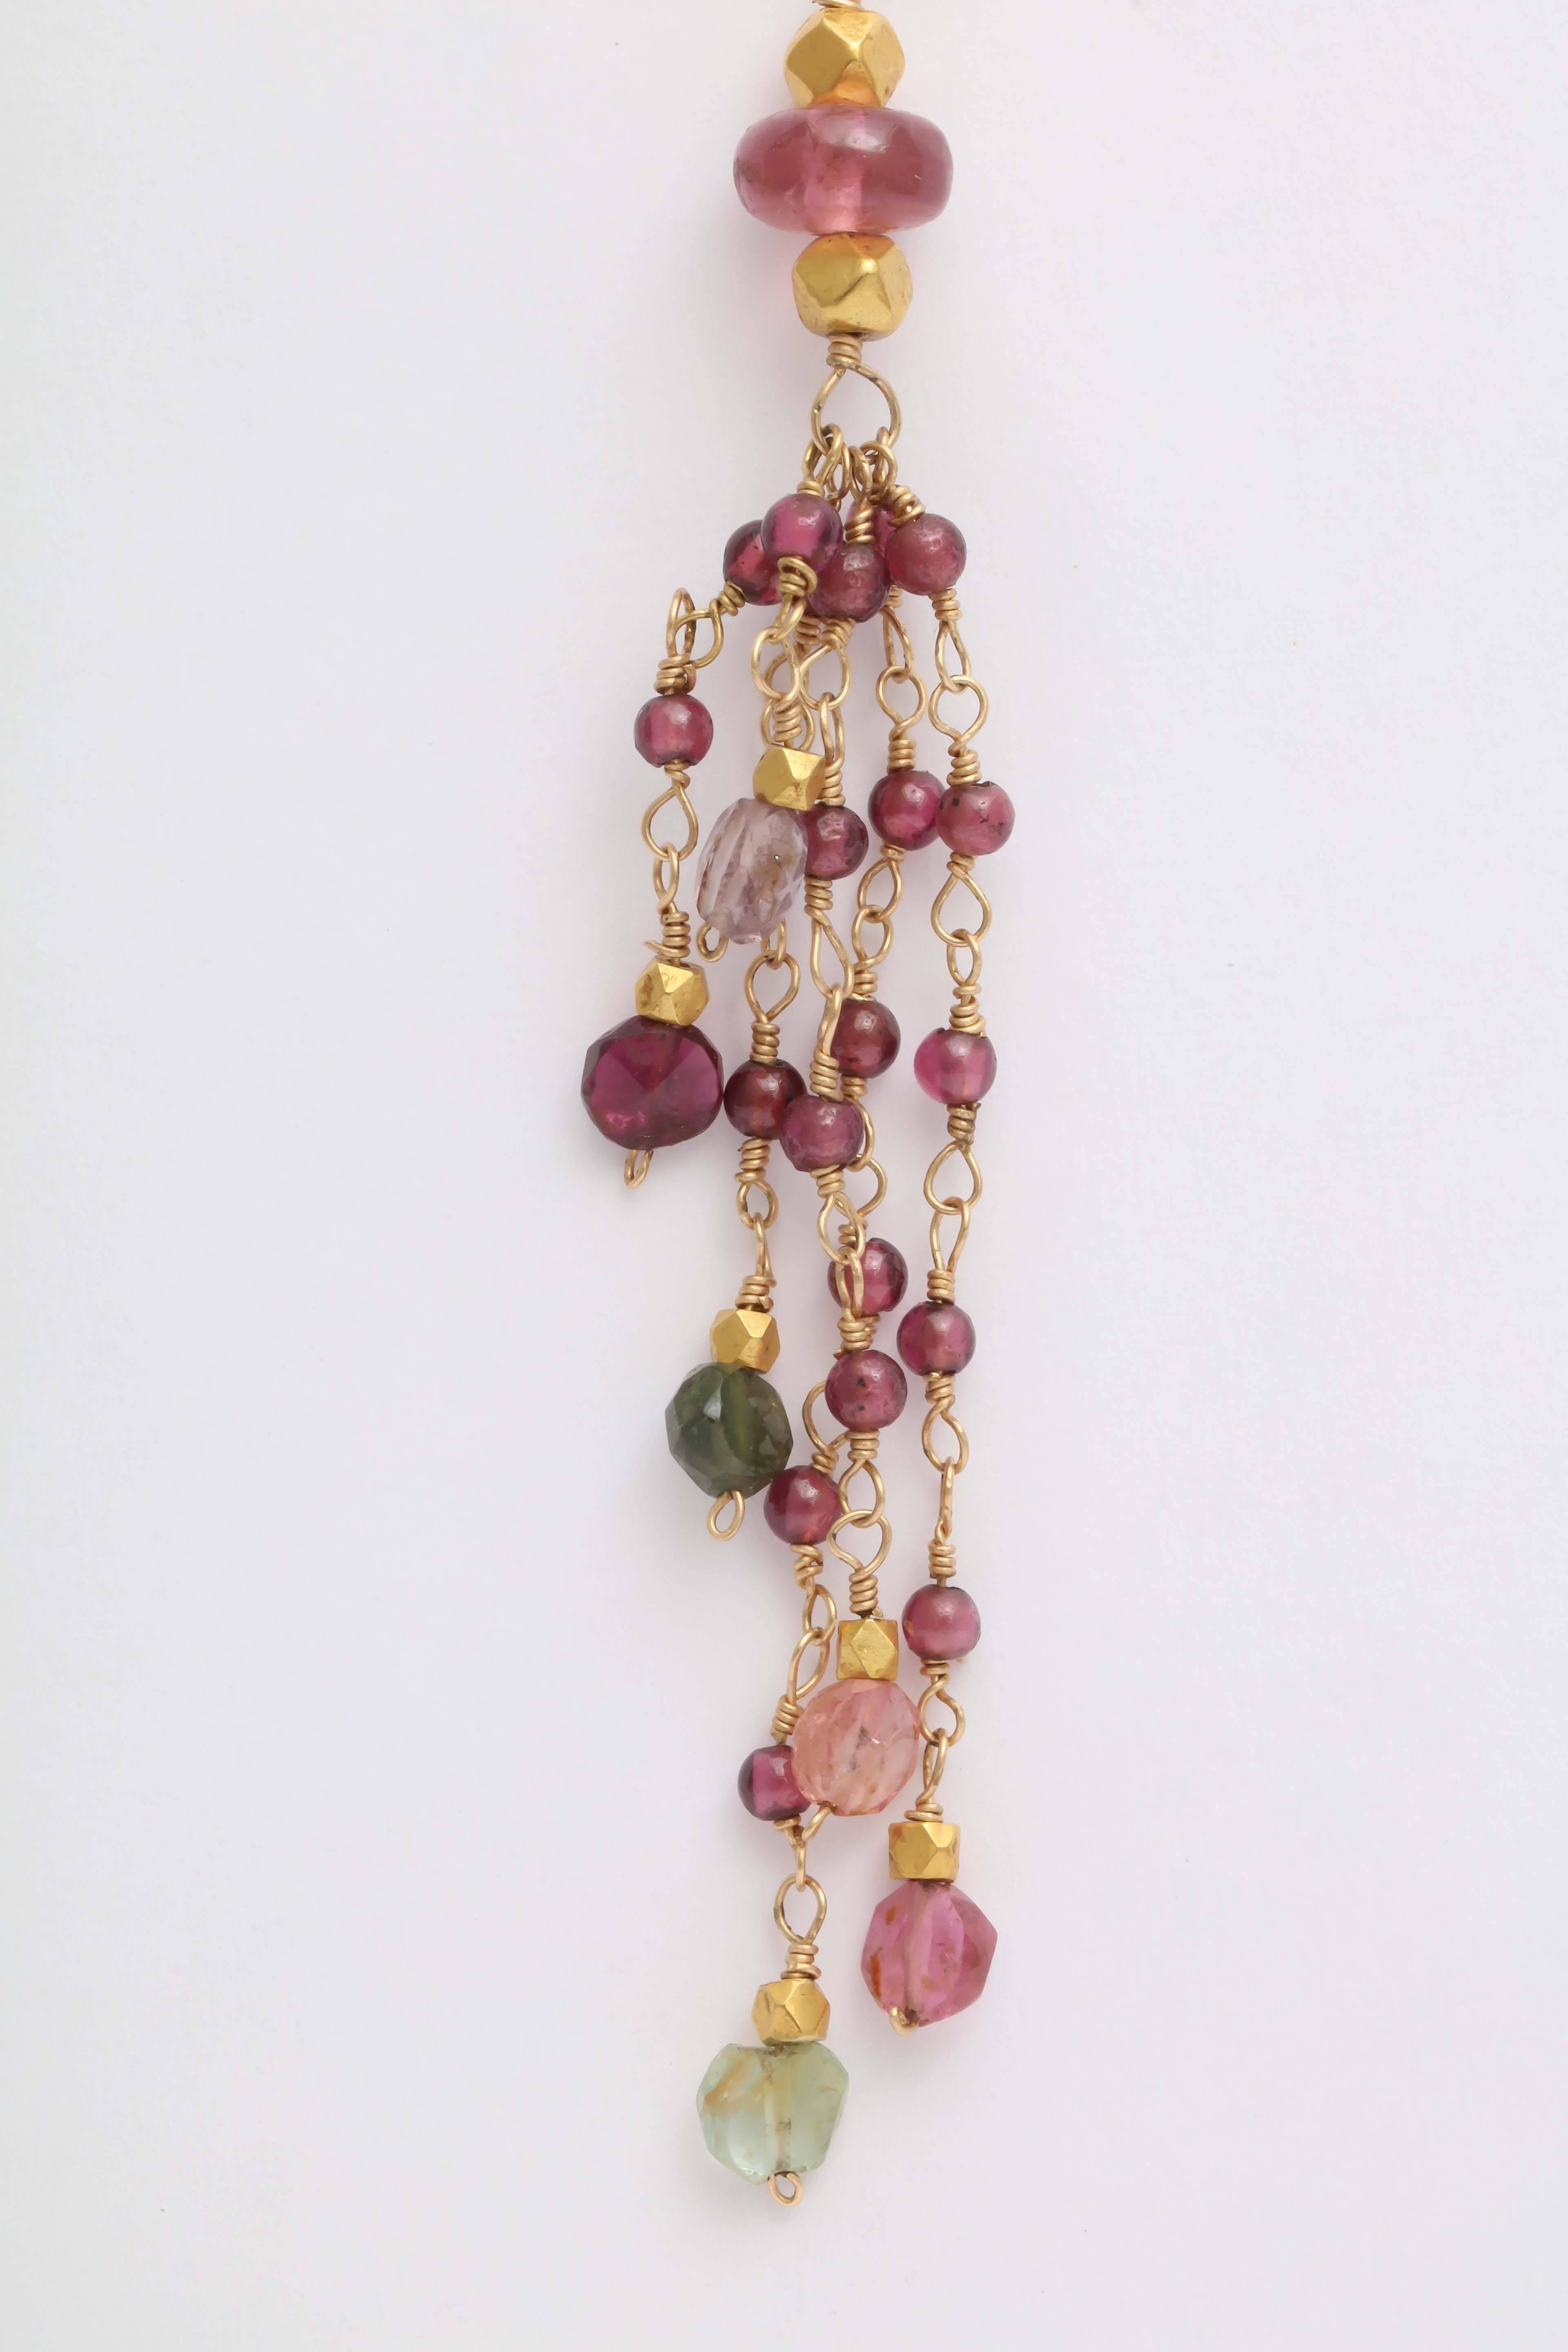 Delicate 2 mm round garnet beads, gold beads and faceted tourmaline bead are wired together in a long graceful dancing earrings. The top of the earrings are  beautifully carved with a flower design in gold and holds the ear wire securely. The total